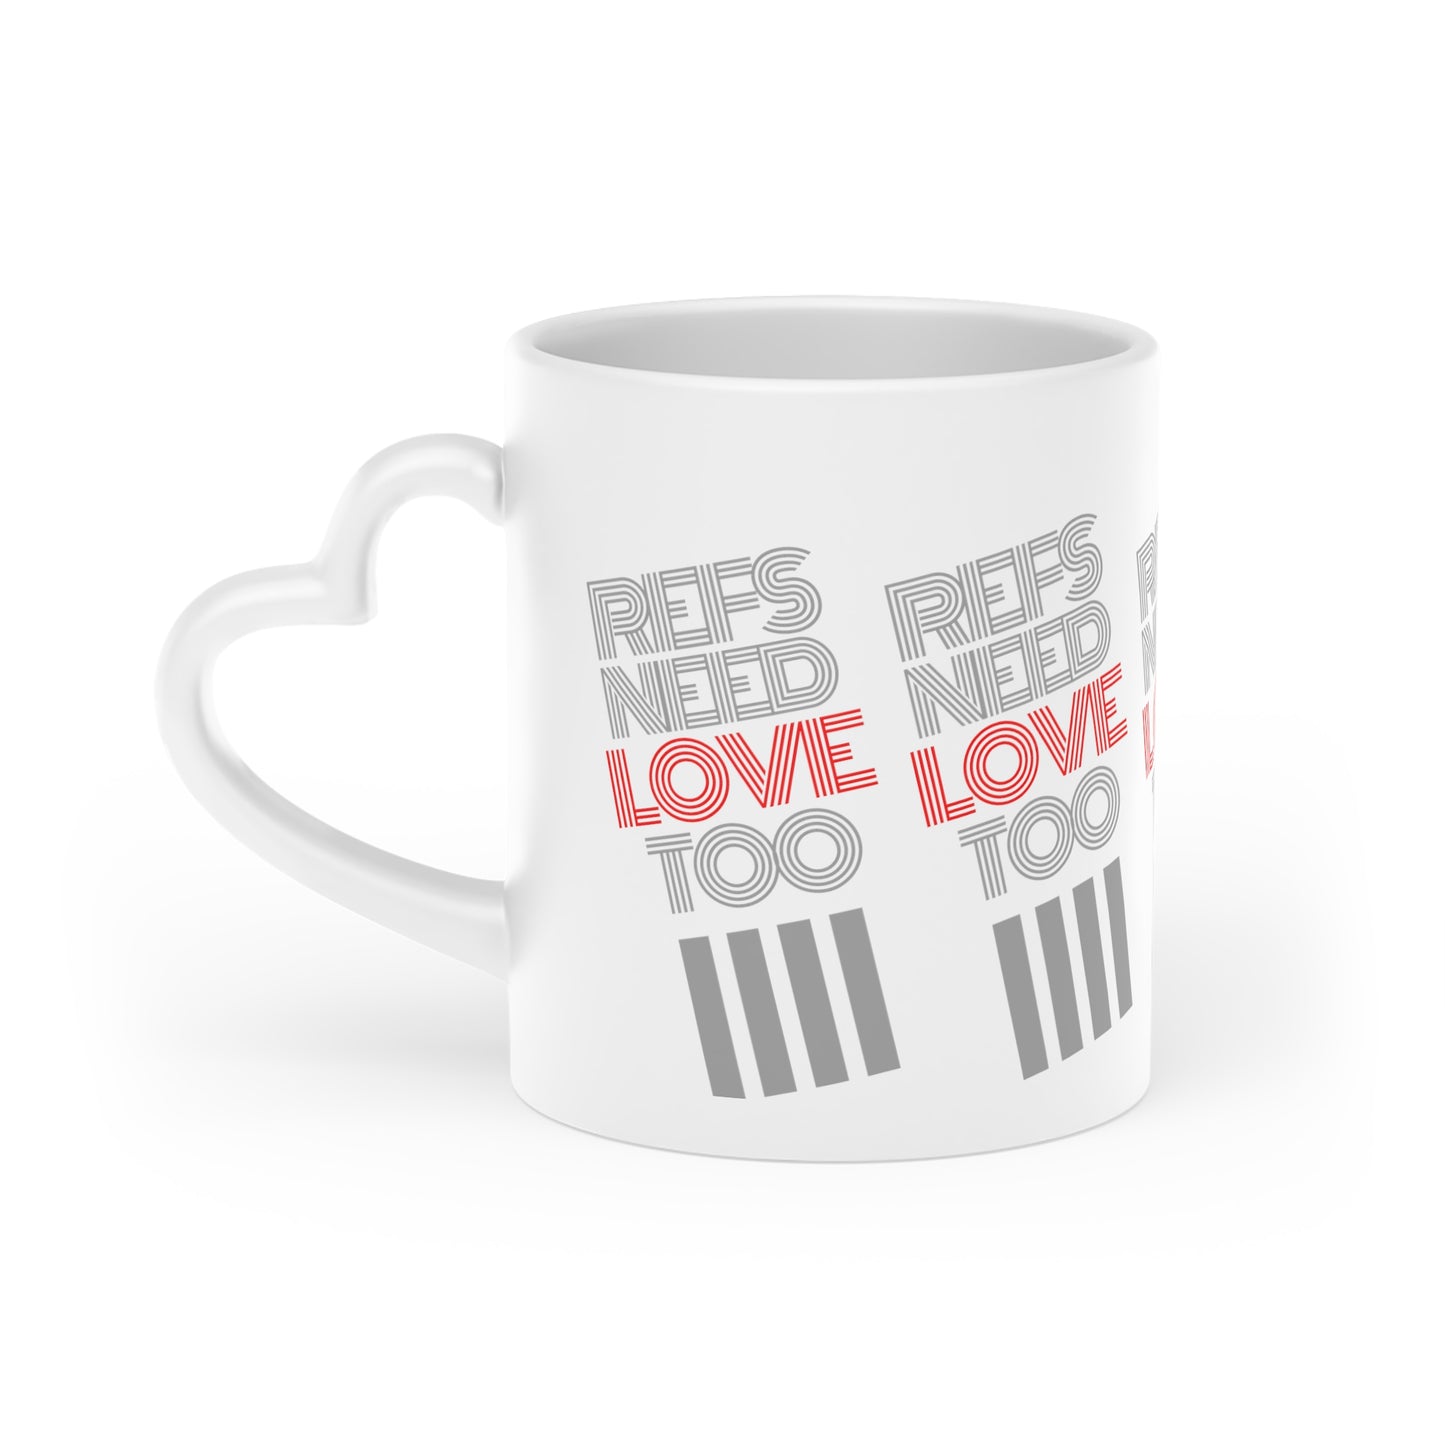 Refs Need Love Too Heart-Shaped Mug | Gift for Referees | White 11 oz. Coffee cup | Referee Gift | Mug for tea or cocoa